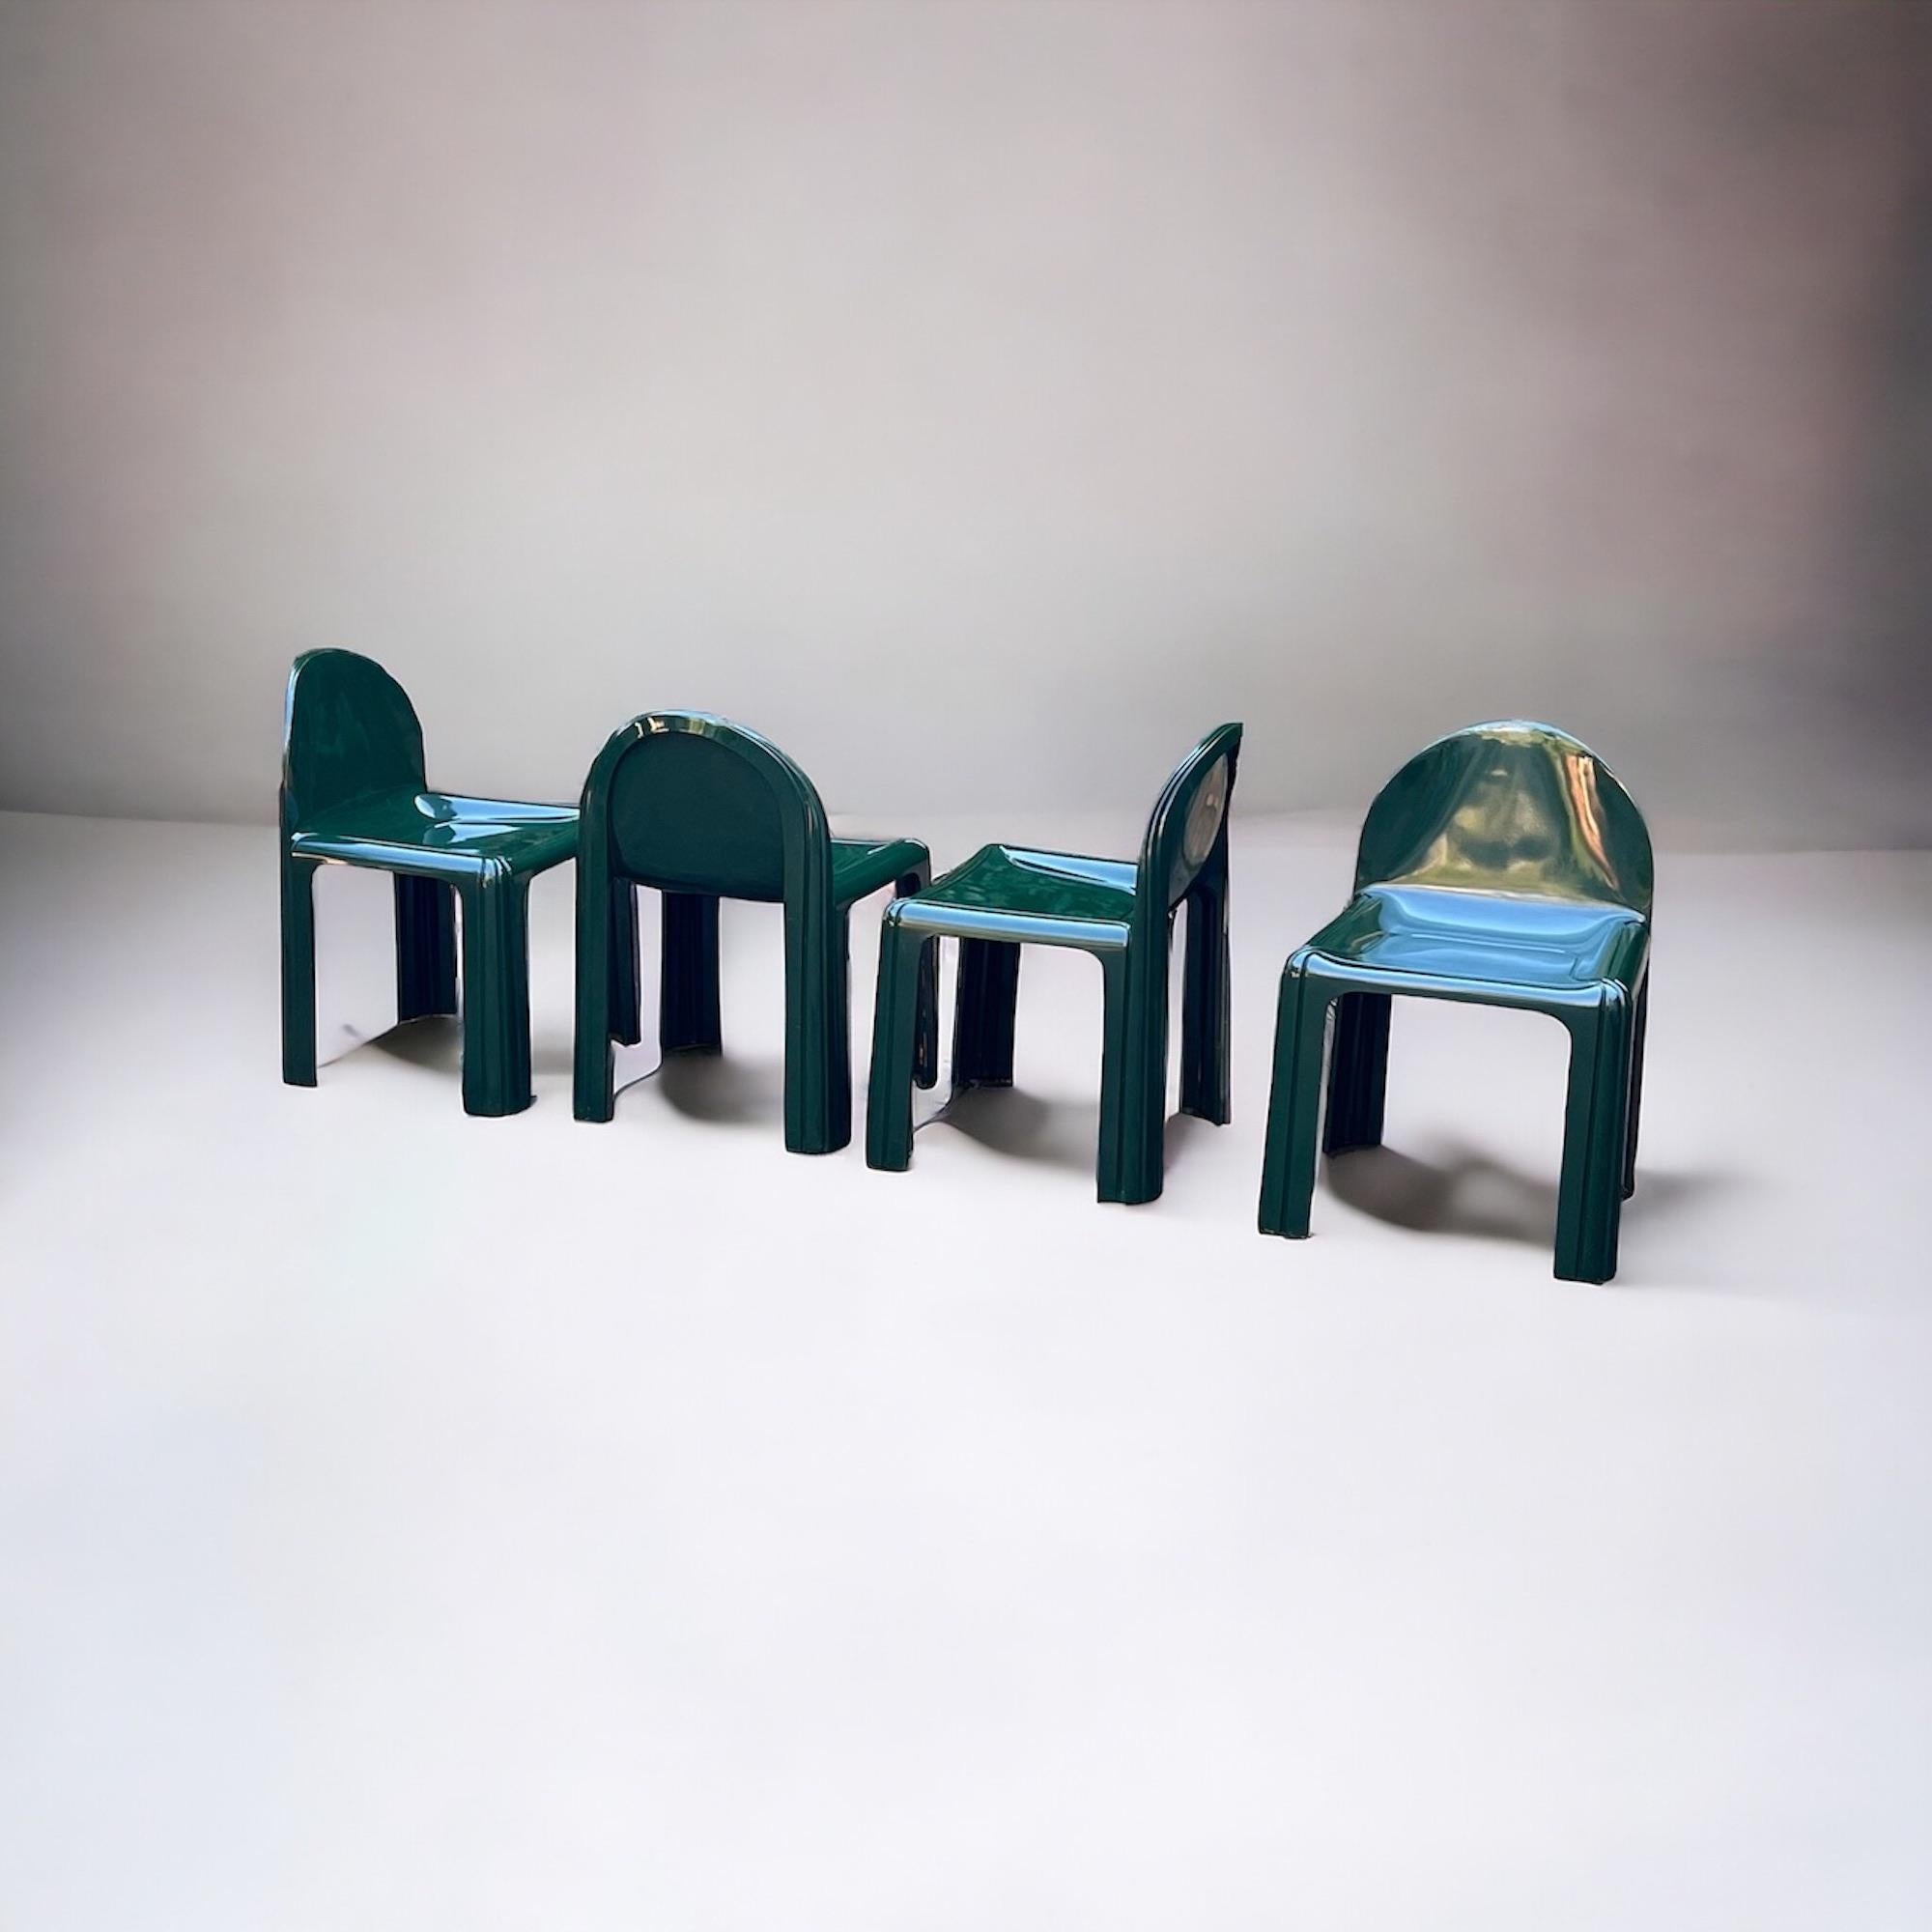 Kartell Model 4854 Chairs by Gae Aulenti, 1960s - Set of 4 - Emerald Green Resin 1